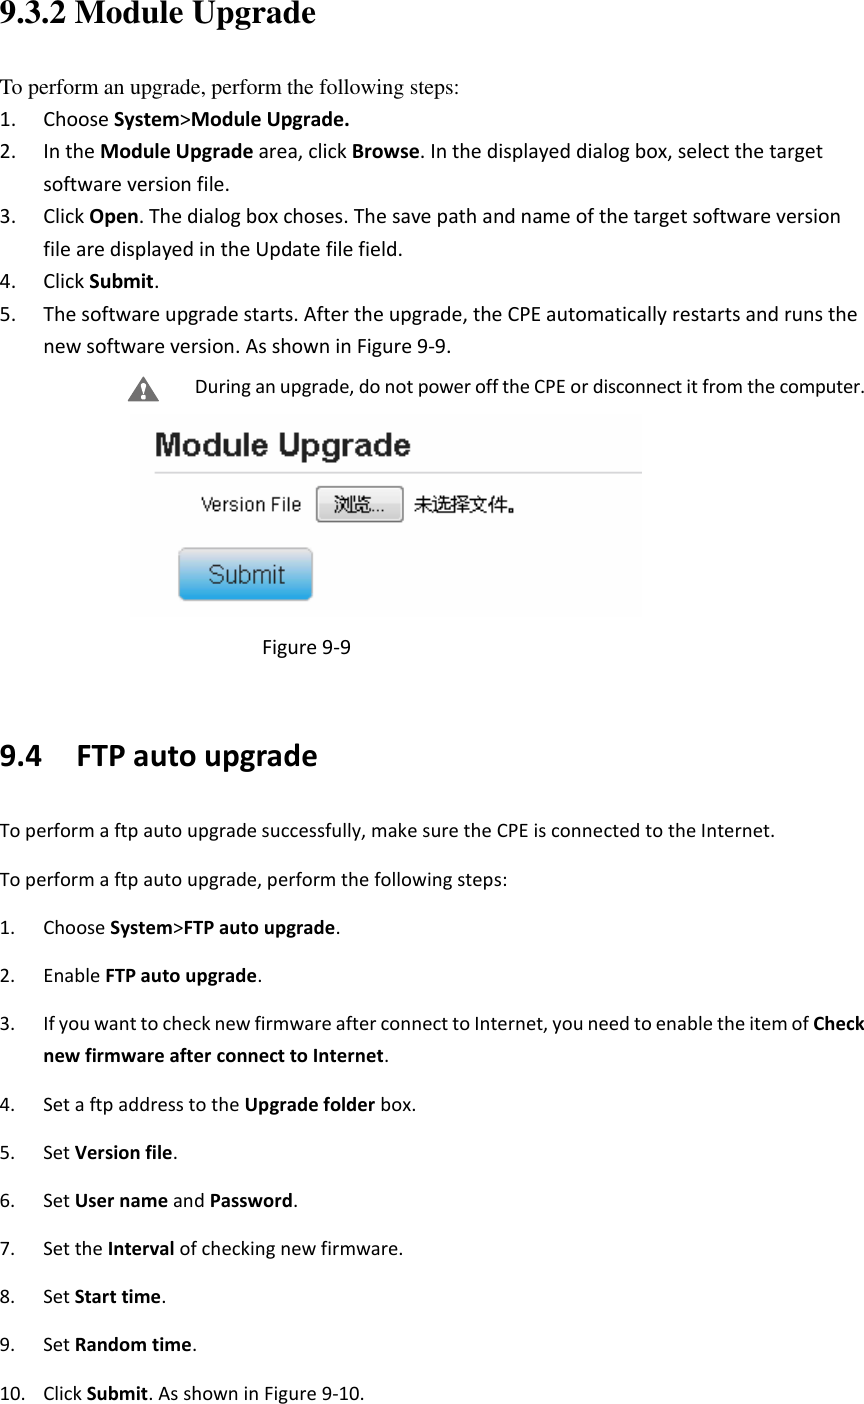   9.3.2 Module Upgrade To perform an upgrade, perform the following steps: 1. Choose System&gt;Module Upgrade. 2. In the Module Upgrade area, click Browse. In the displayed dialog box, select the target software version file. 3. Click Open. The dialog box choses. The save path and name of the target software version file are displayed in the Update file field. 4. Click Submit. 5. The software upgrade starts. After the upgrade, the CPE automatically restarts and runs the new software version. As shown in Figure 9-9. During an upgrade, do not power off the CPE or disconnect it from the computer.  Figure 9-9  9.4   FTP auto upgrade To perform a ftp auto upgrade successfully, make sure the CPE is connected to the Internet. To perform a ftp auto upgrade, perform the following steps: 1. Choose System&gt;FTP auto upgrade. 2. Enable FTP auto upgrade. 3. If you want to check new firmware after connect to Internet, you need to enable the item of Check new firmware after connect to Internet. 4. Set a ftp address to the Upgrade folder box. 5. Set Version file. 6. Set User name and Password. 7. Set the Interval of checking new firmware. 8. Set Start time. 9. Set Random time. 10. Click Submit. As shown in Figure 9-10. 